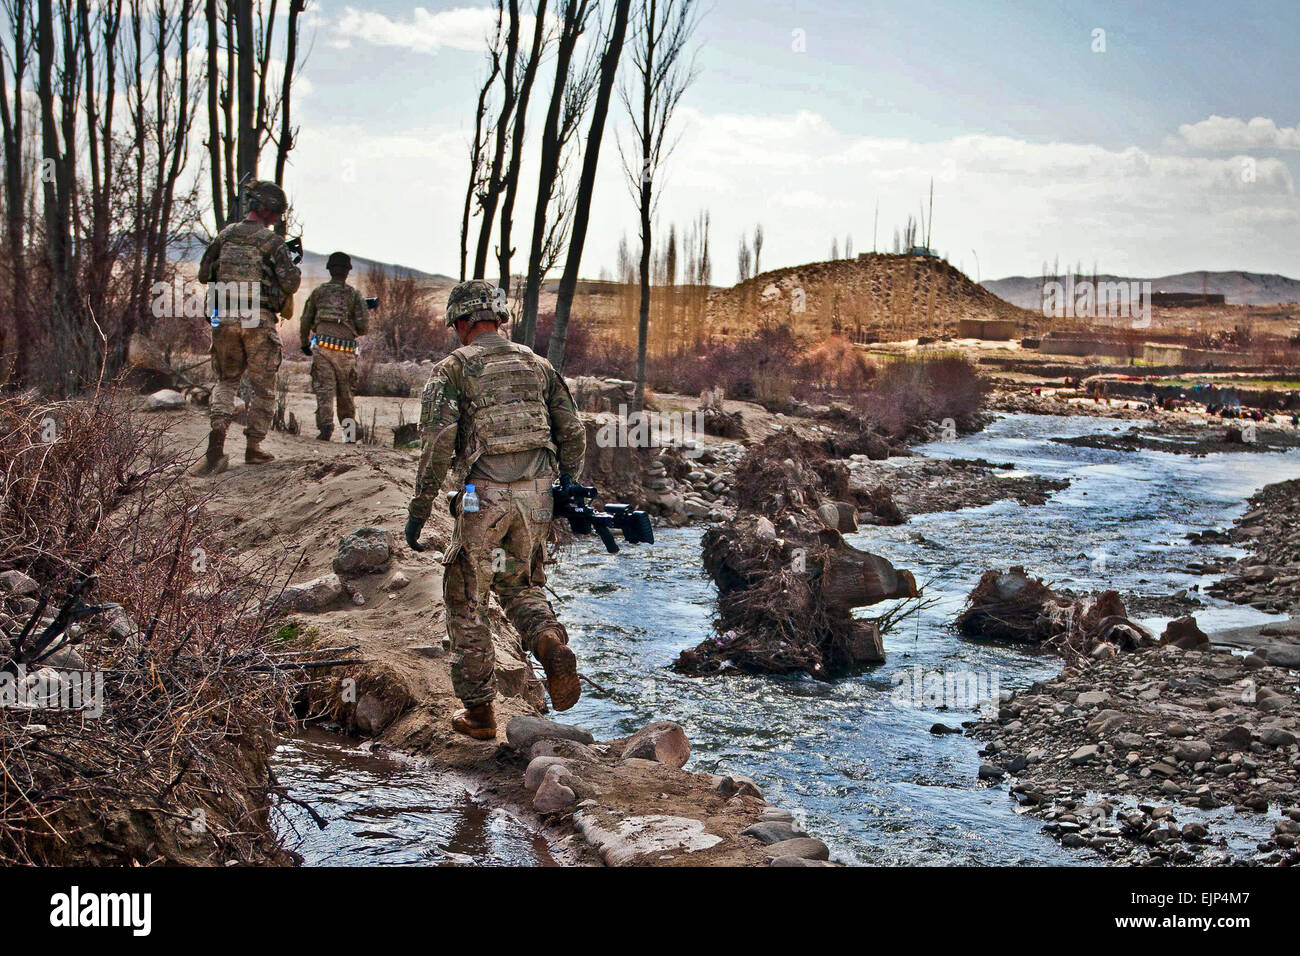 Soldiers from Company A, 2nd Battalion, 28th Infantry Regiment, Task Force 3-66th, navigate narrow causeways along a river bank in the village of Marzak. Marzak has historically been a stronghold for the insurgency over the past decade until the Afghan and U.S Forces took advantage of the winter months to establish a local police force and secure the village from foreign fighters who transit the area during the fighting season.  Staff Sgt. Charles Crail, 172nd Infantry Brigade, Task Force Blackhawk Stock Photo